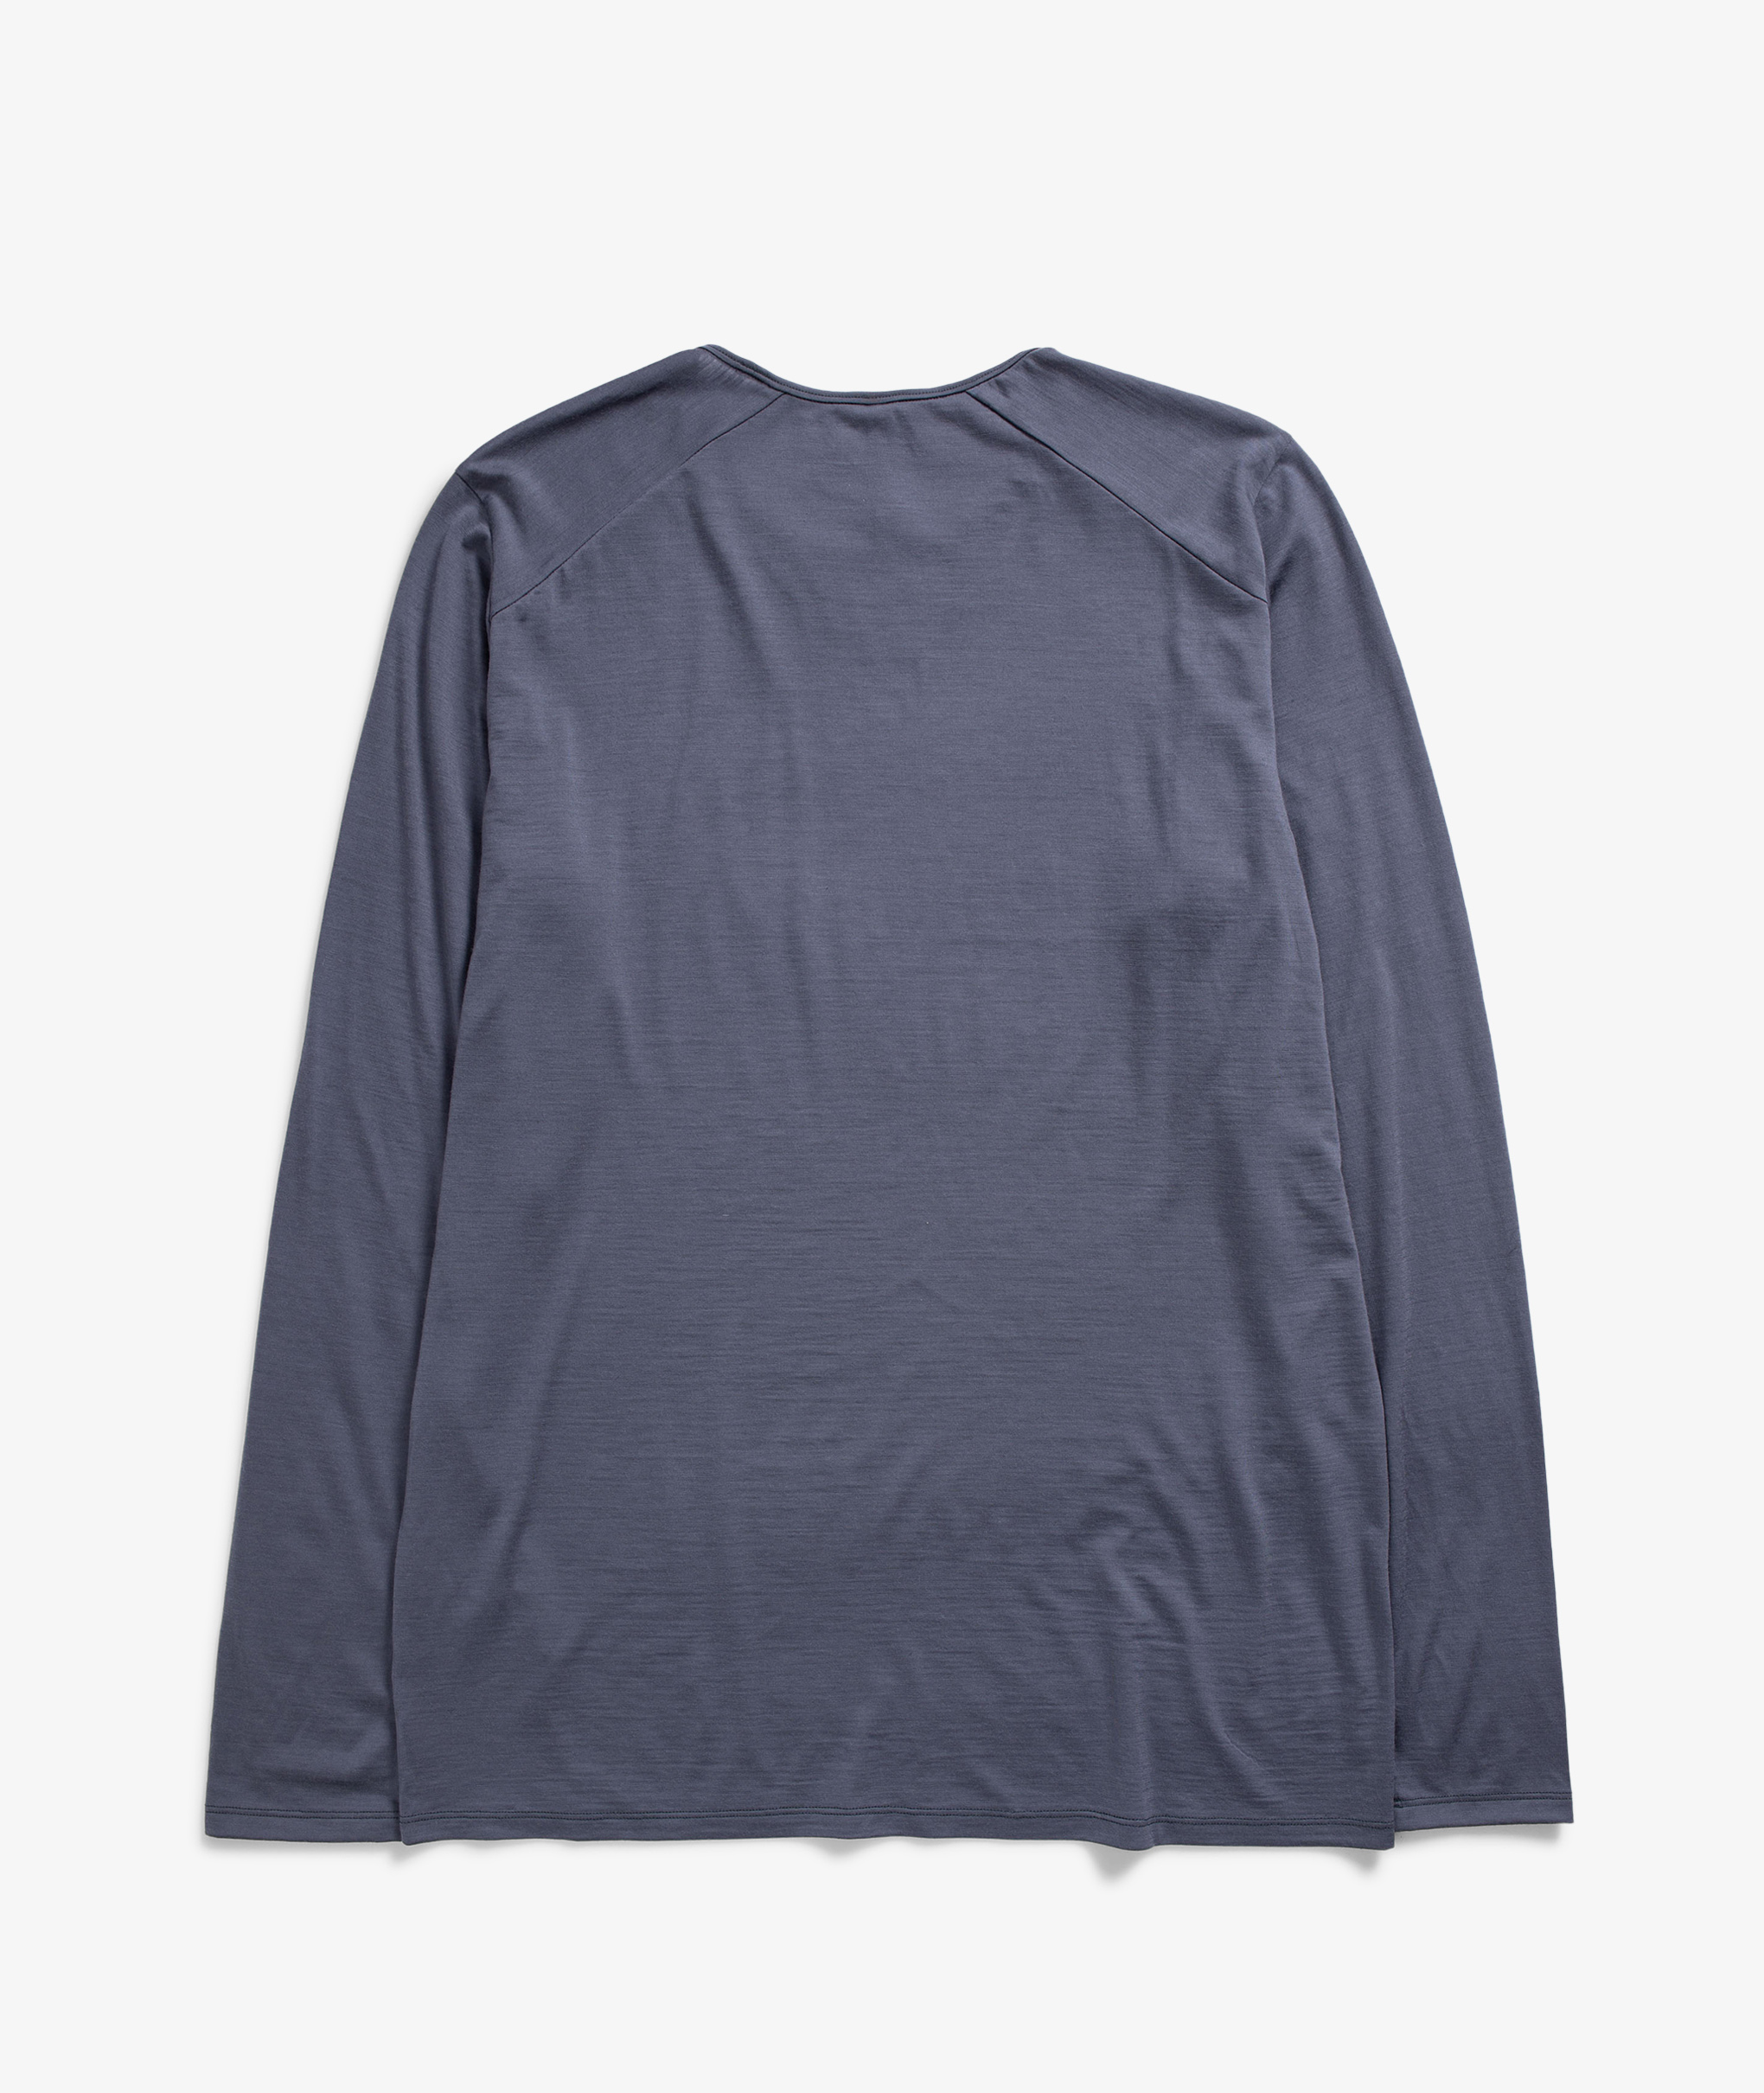 Norse Store | Shipping - Shirt - LS Worldwide Overcast Veilance Frame